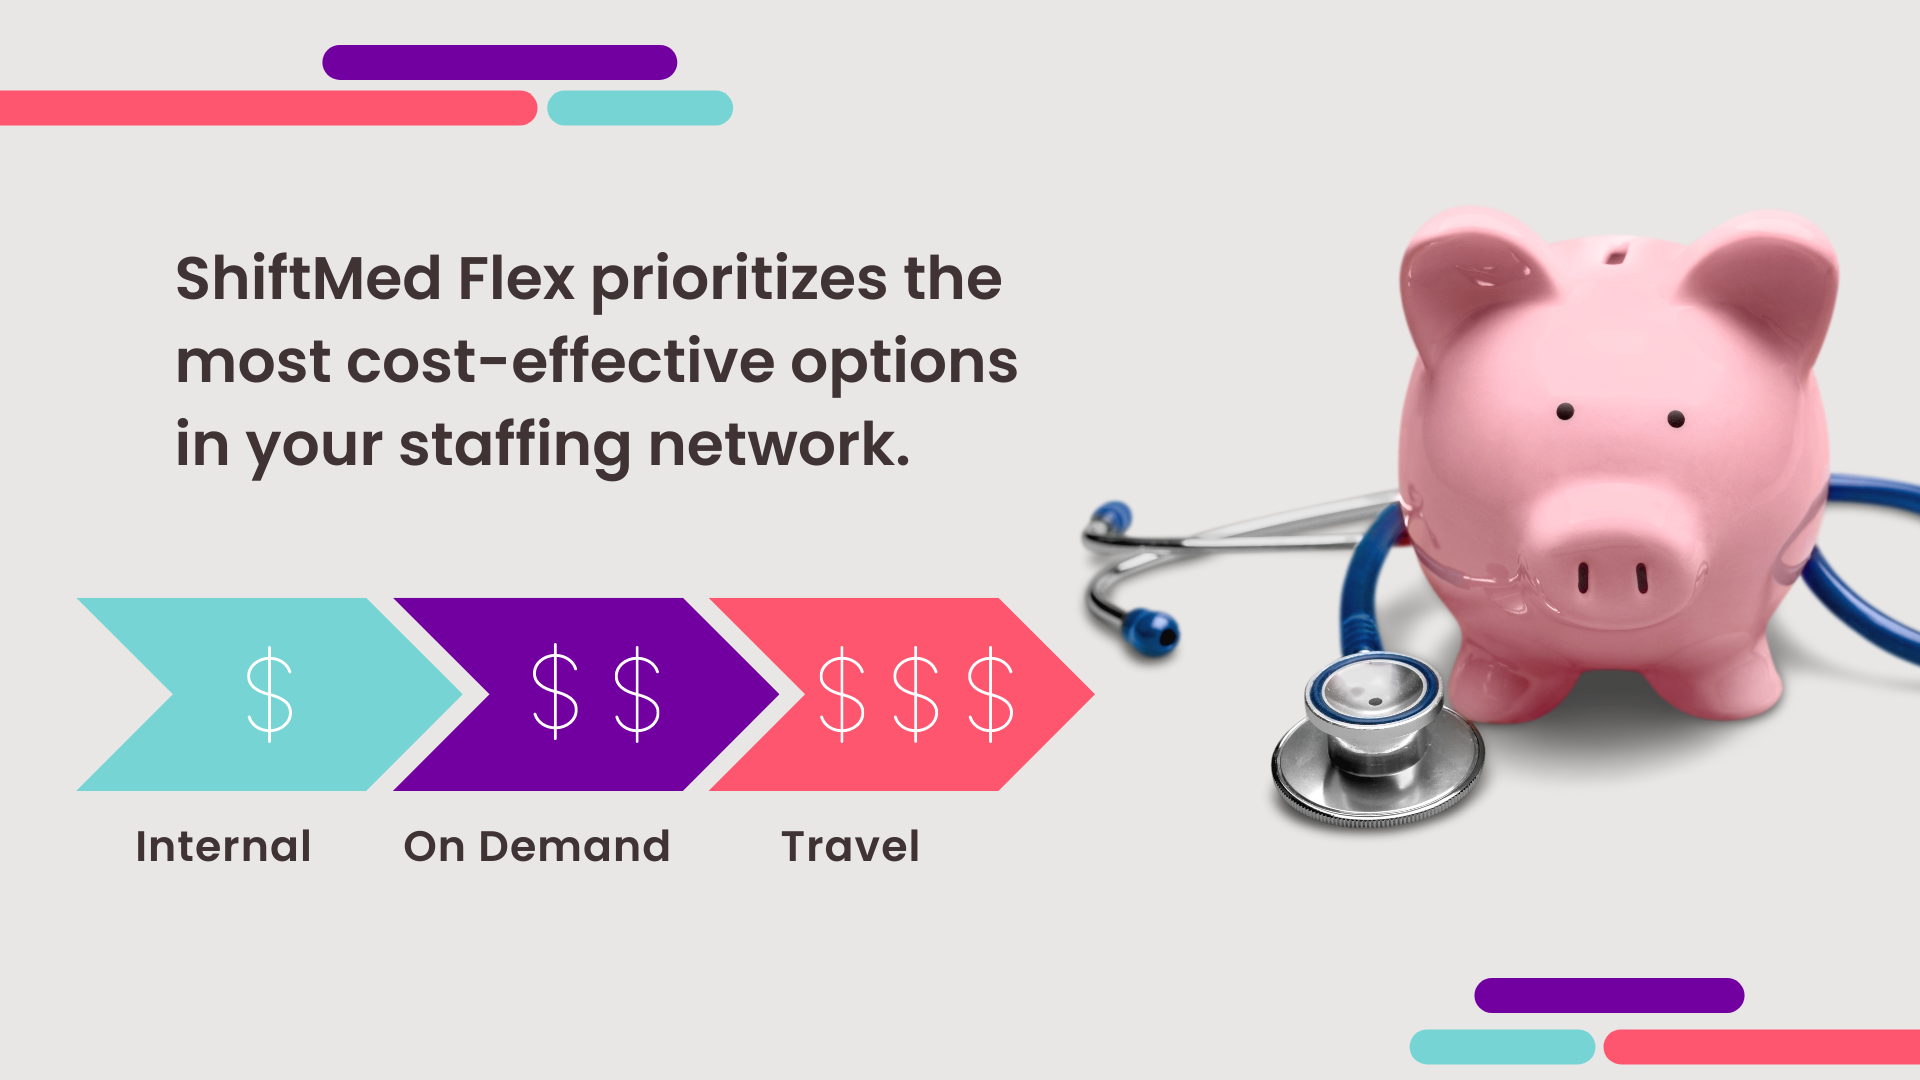 The image shows a piggy bank with a stethoscope and explains how ShiftMed Flex prioritizes the most cost-effective options in an organization's staffing network.